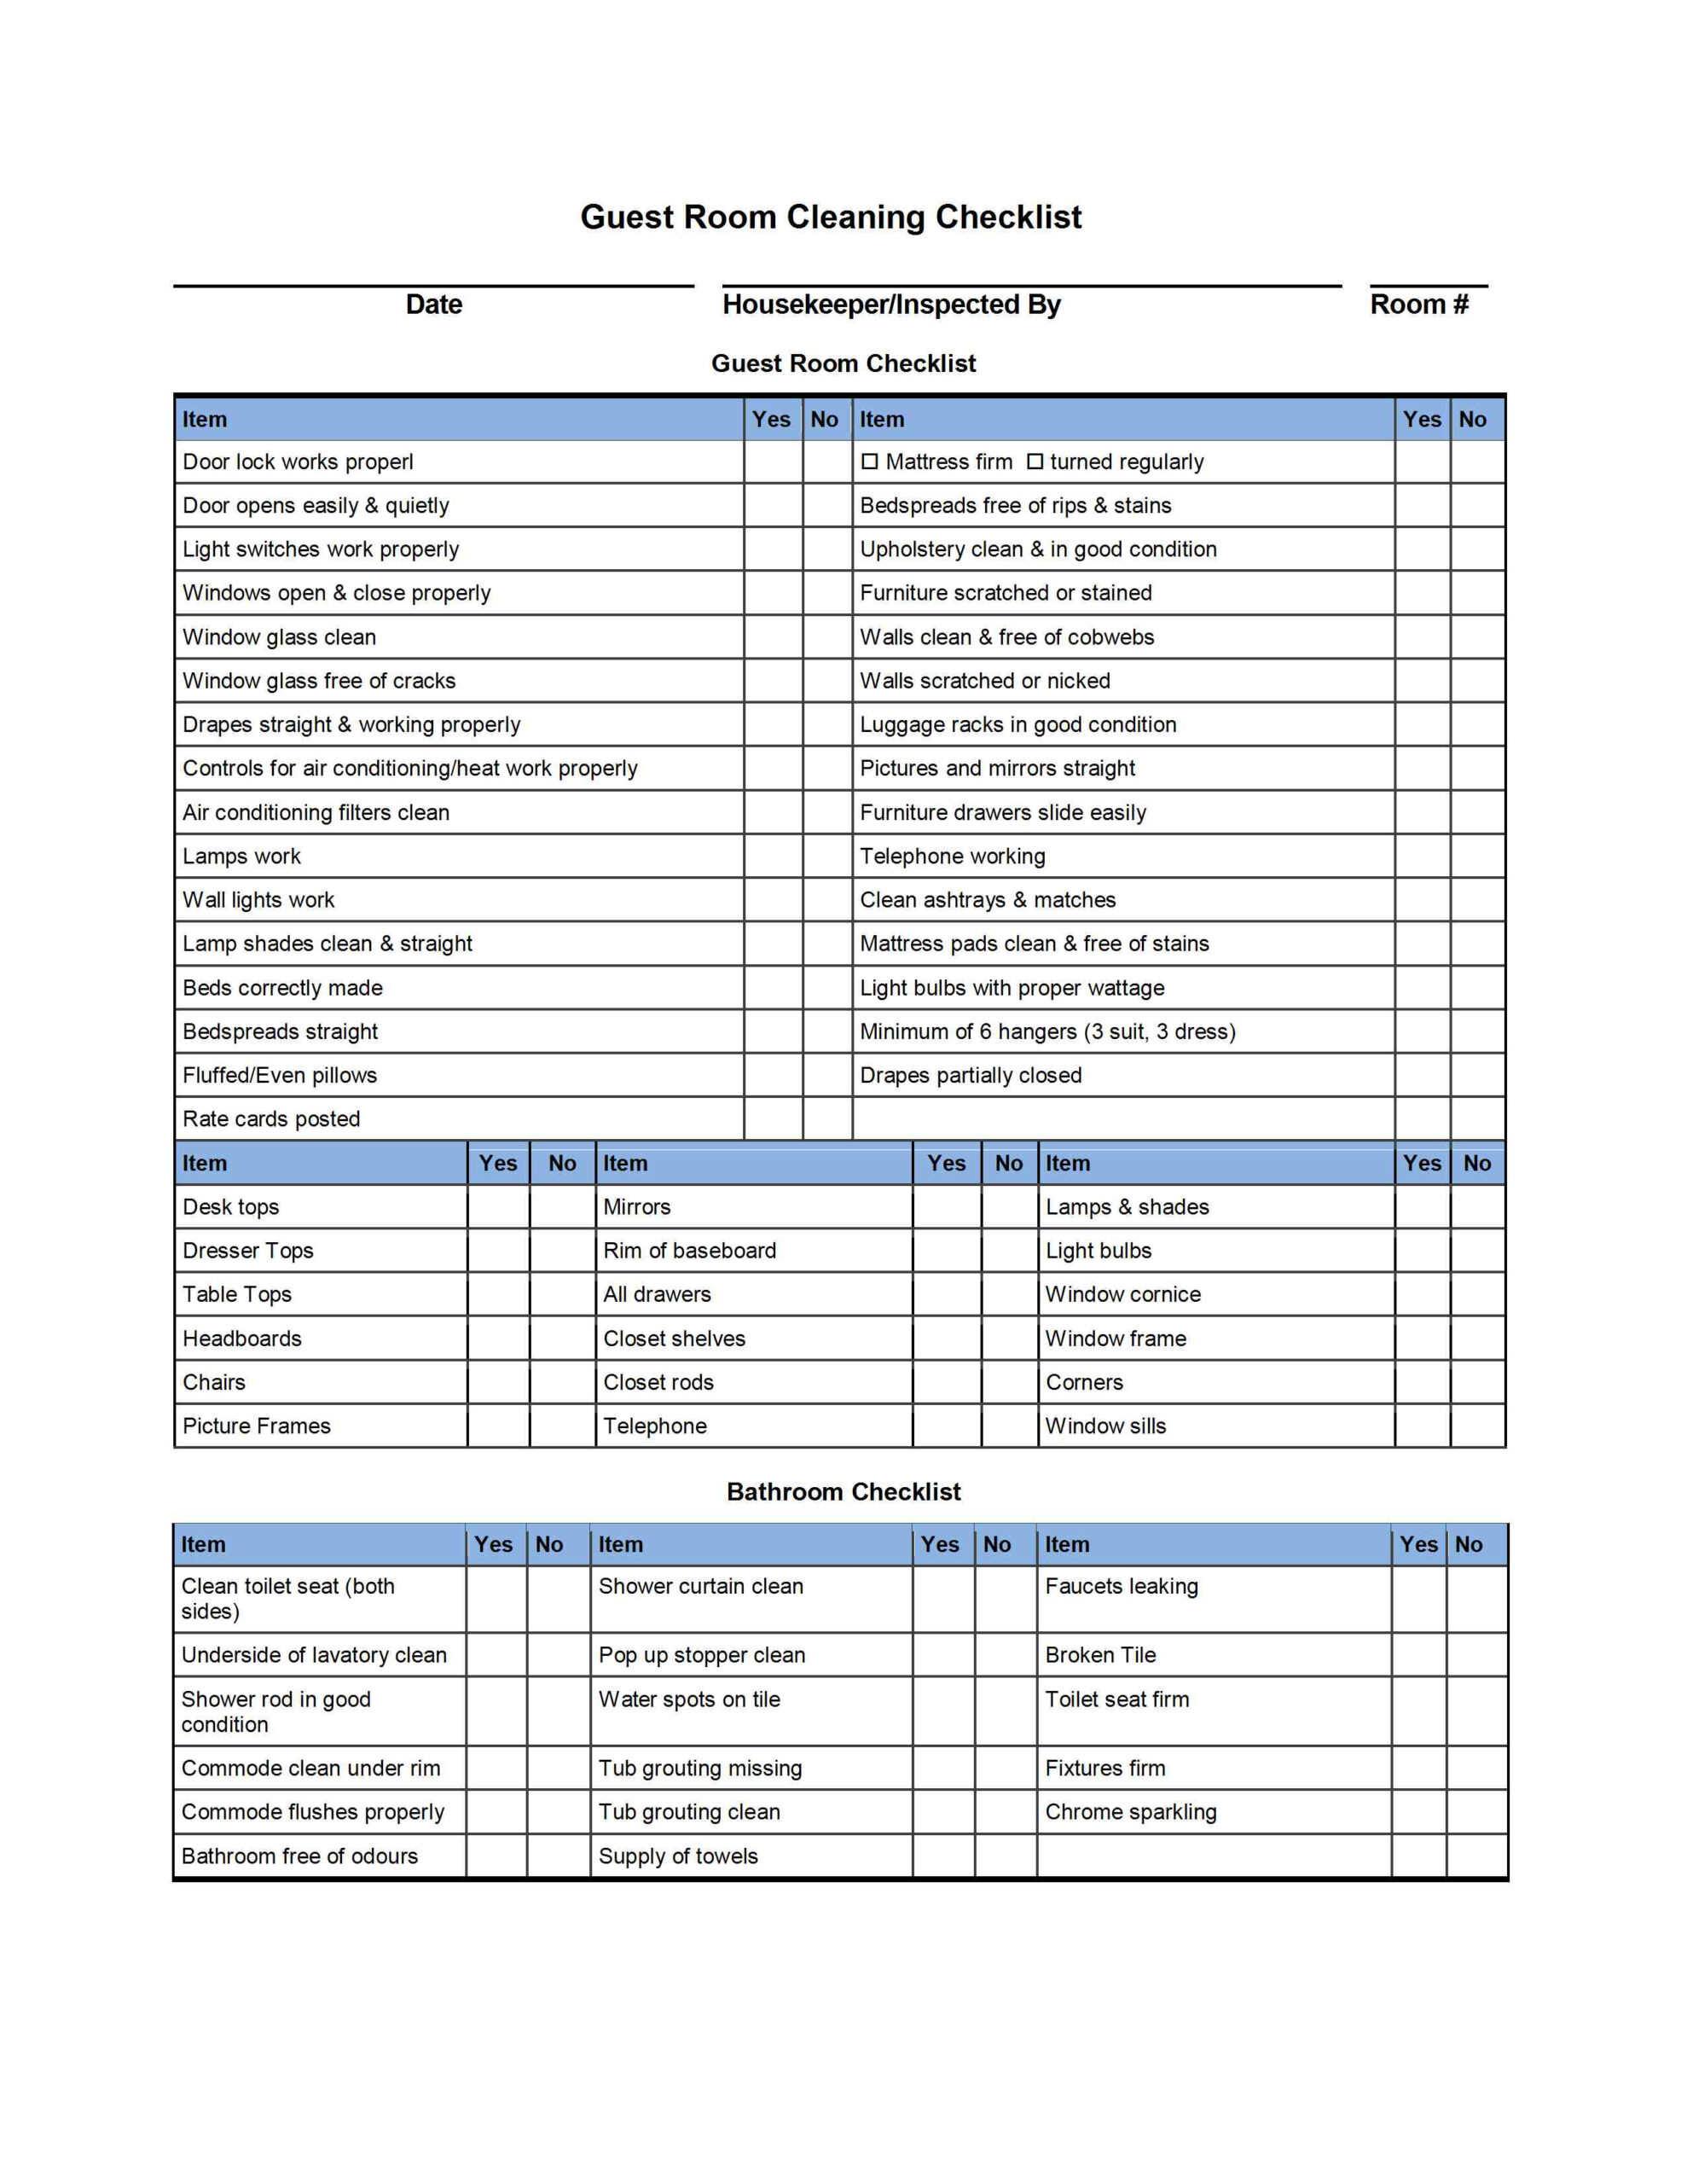 Guest Room Cleaning Checklist Template Throughout Hotel Inspection Checklist Template For Hotel Inspection Checklist Template